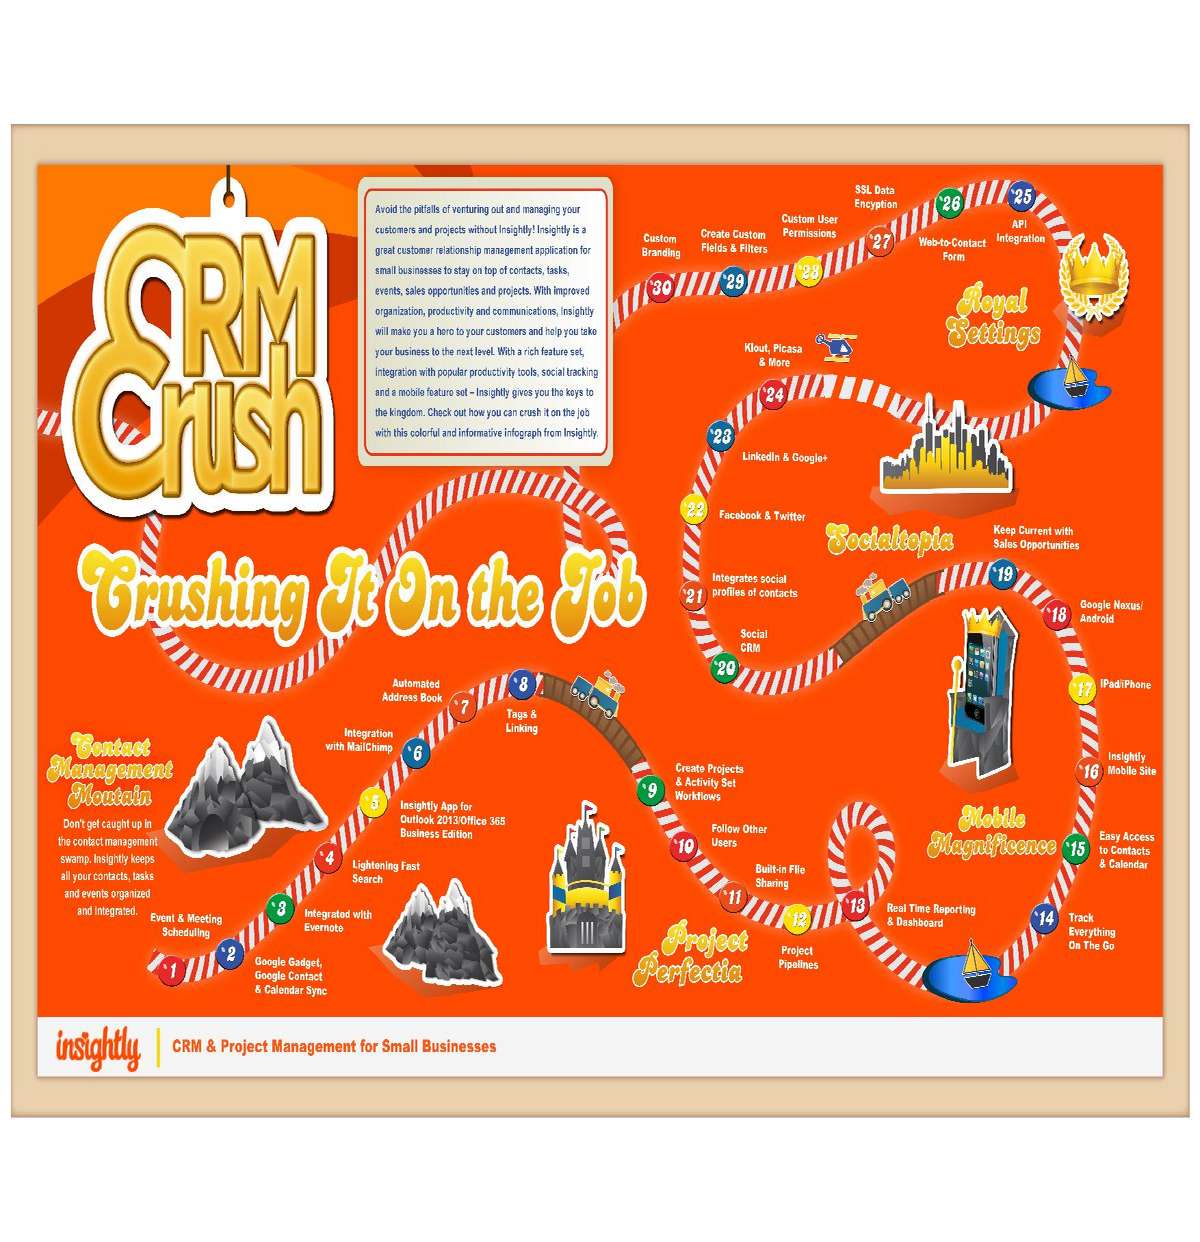 You've Heard of Candy Crush, Now Check out CRM Crush!